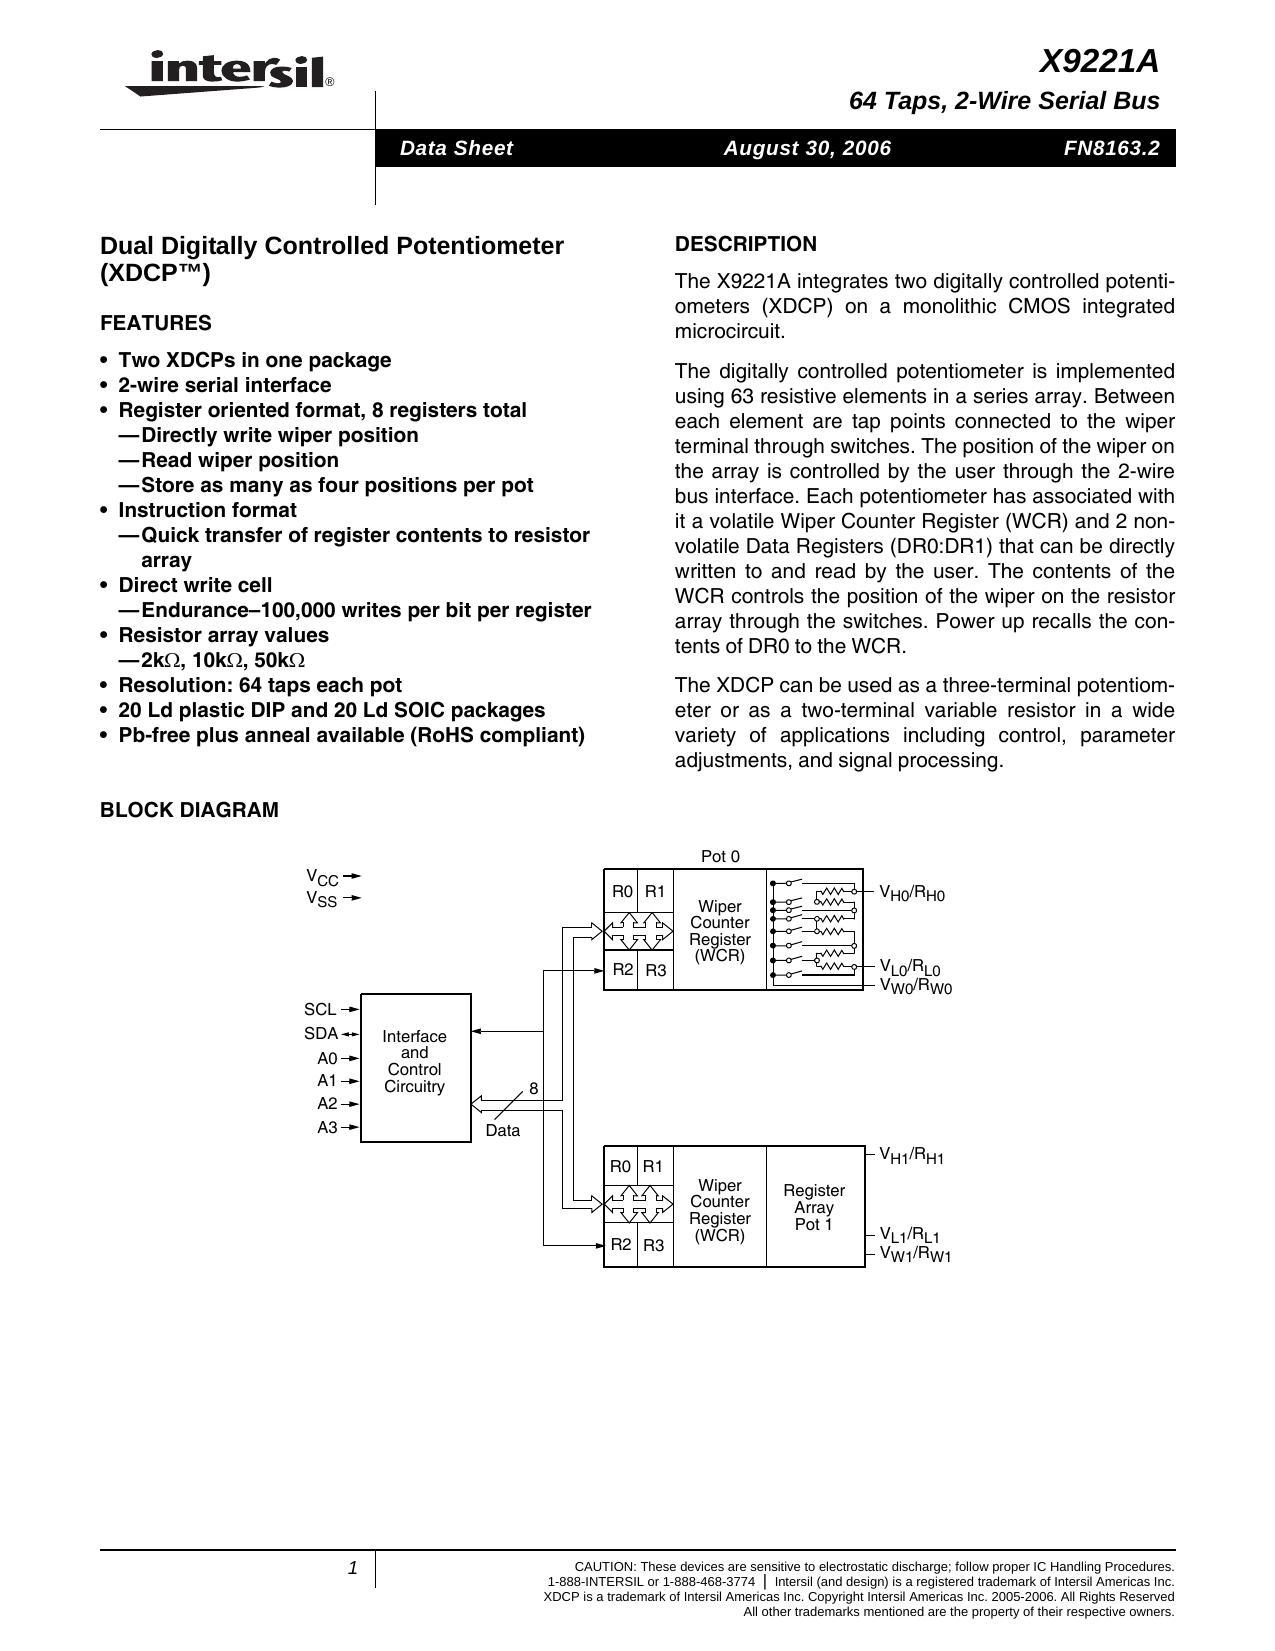 x9221a-64-taps-2-wire-serial-bus-dual-digitally-controlled-potentiometer-xdcp.pdf